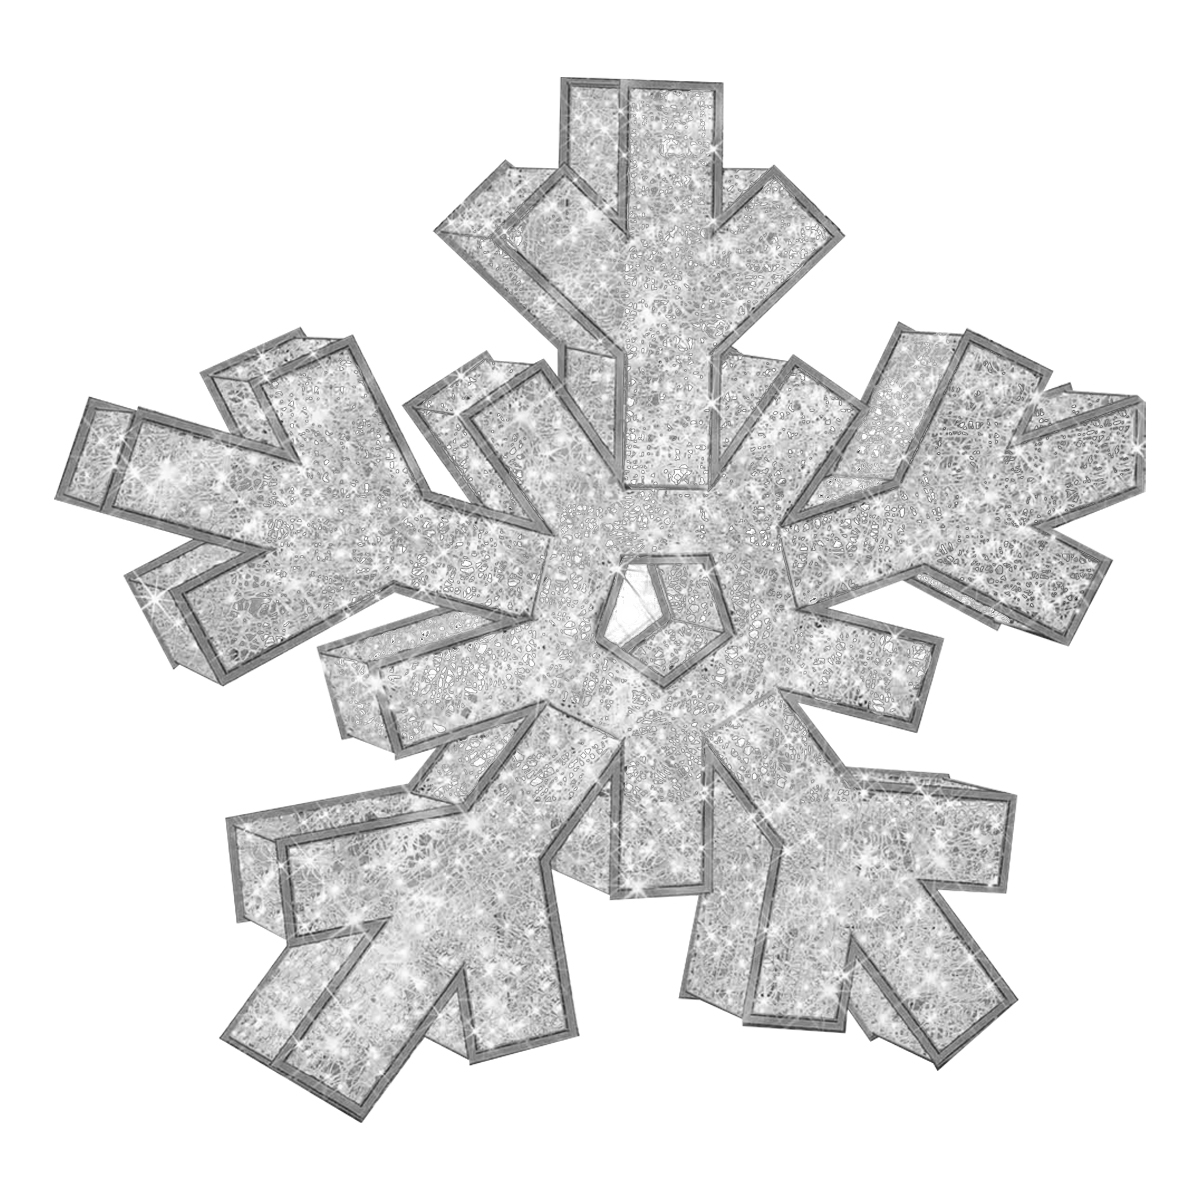 3D Snowflake - Silver Christmas Display - Cool White LEDs - Large - 9.8ft tall